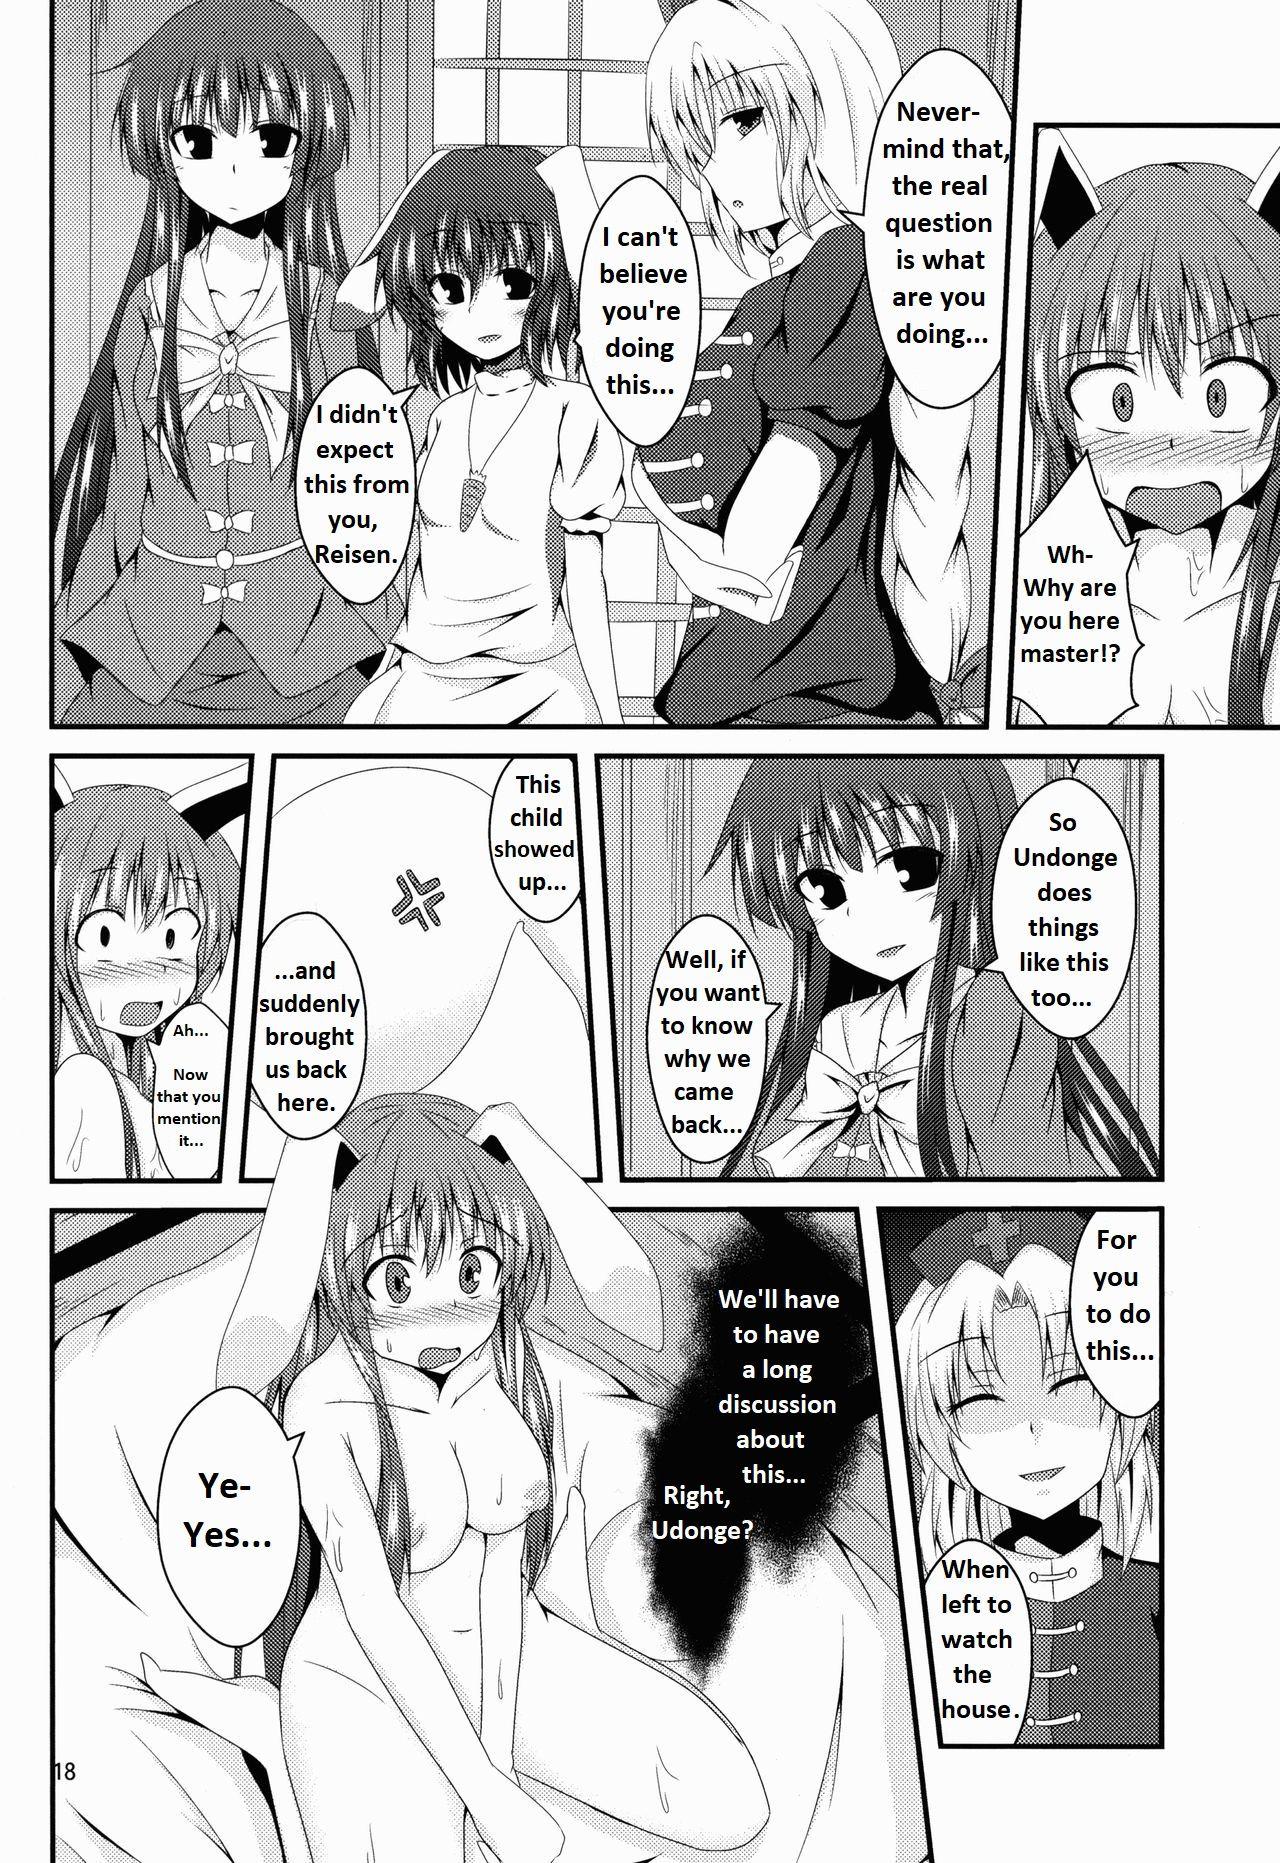 Hypnosis Page 19 Of 23 touhou project hentai haven, Hypnosis Page 19 Of 23 ...